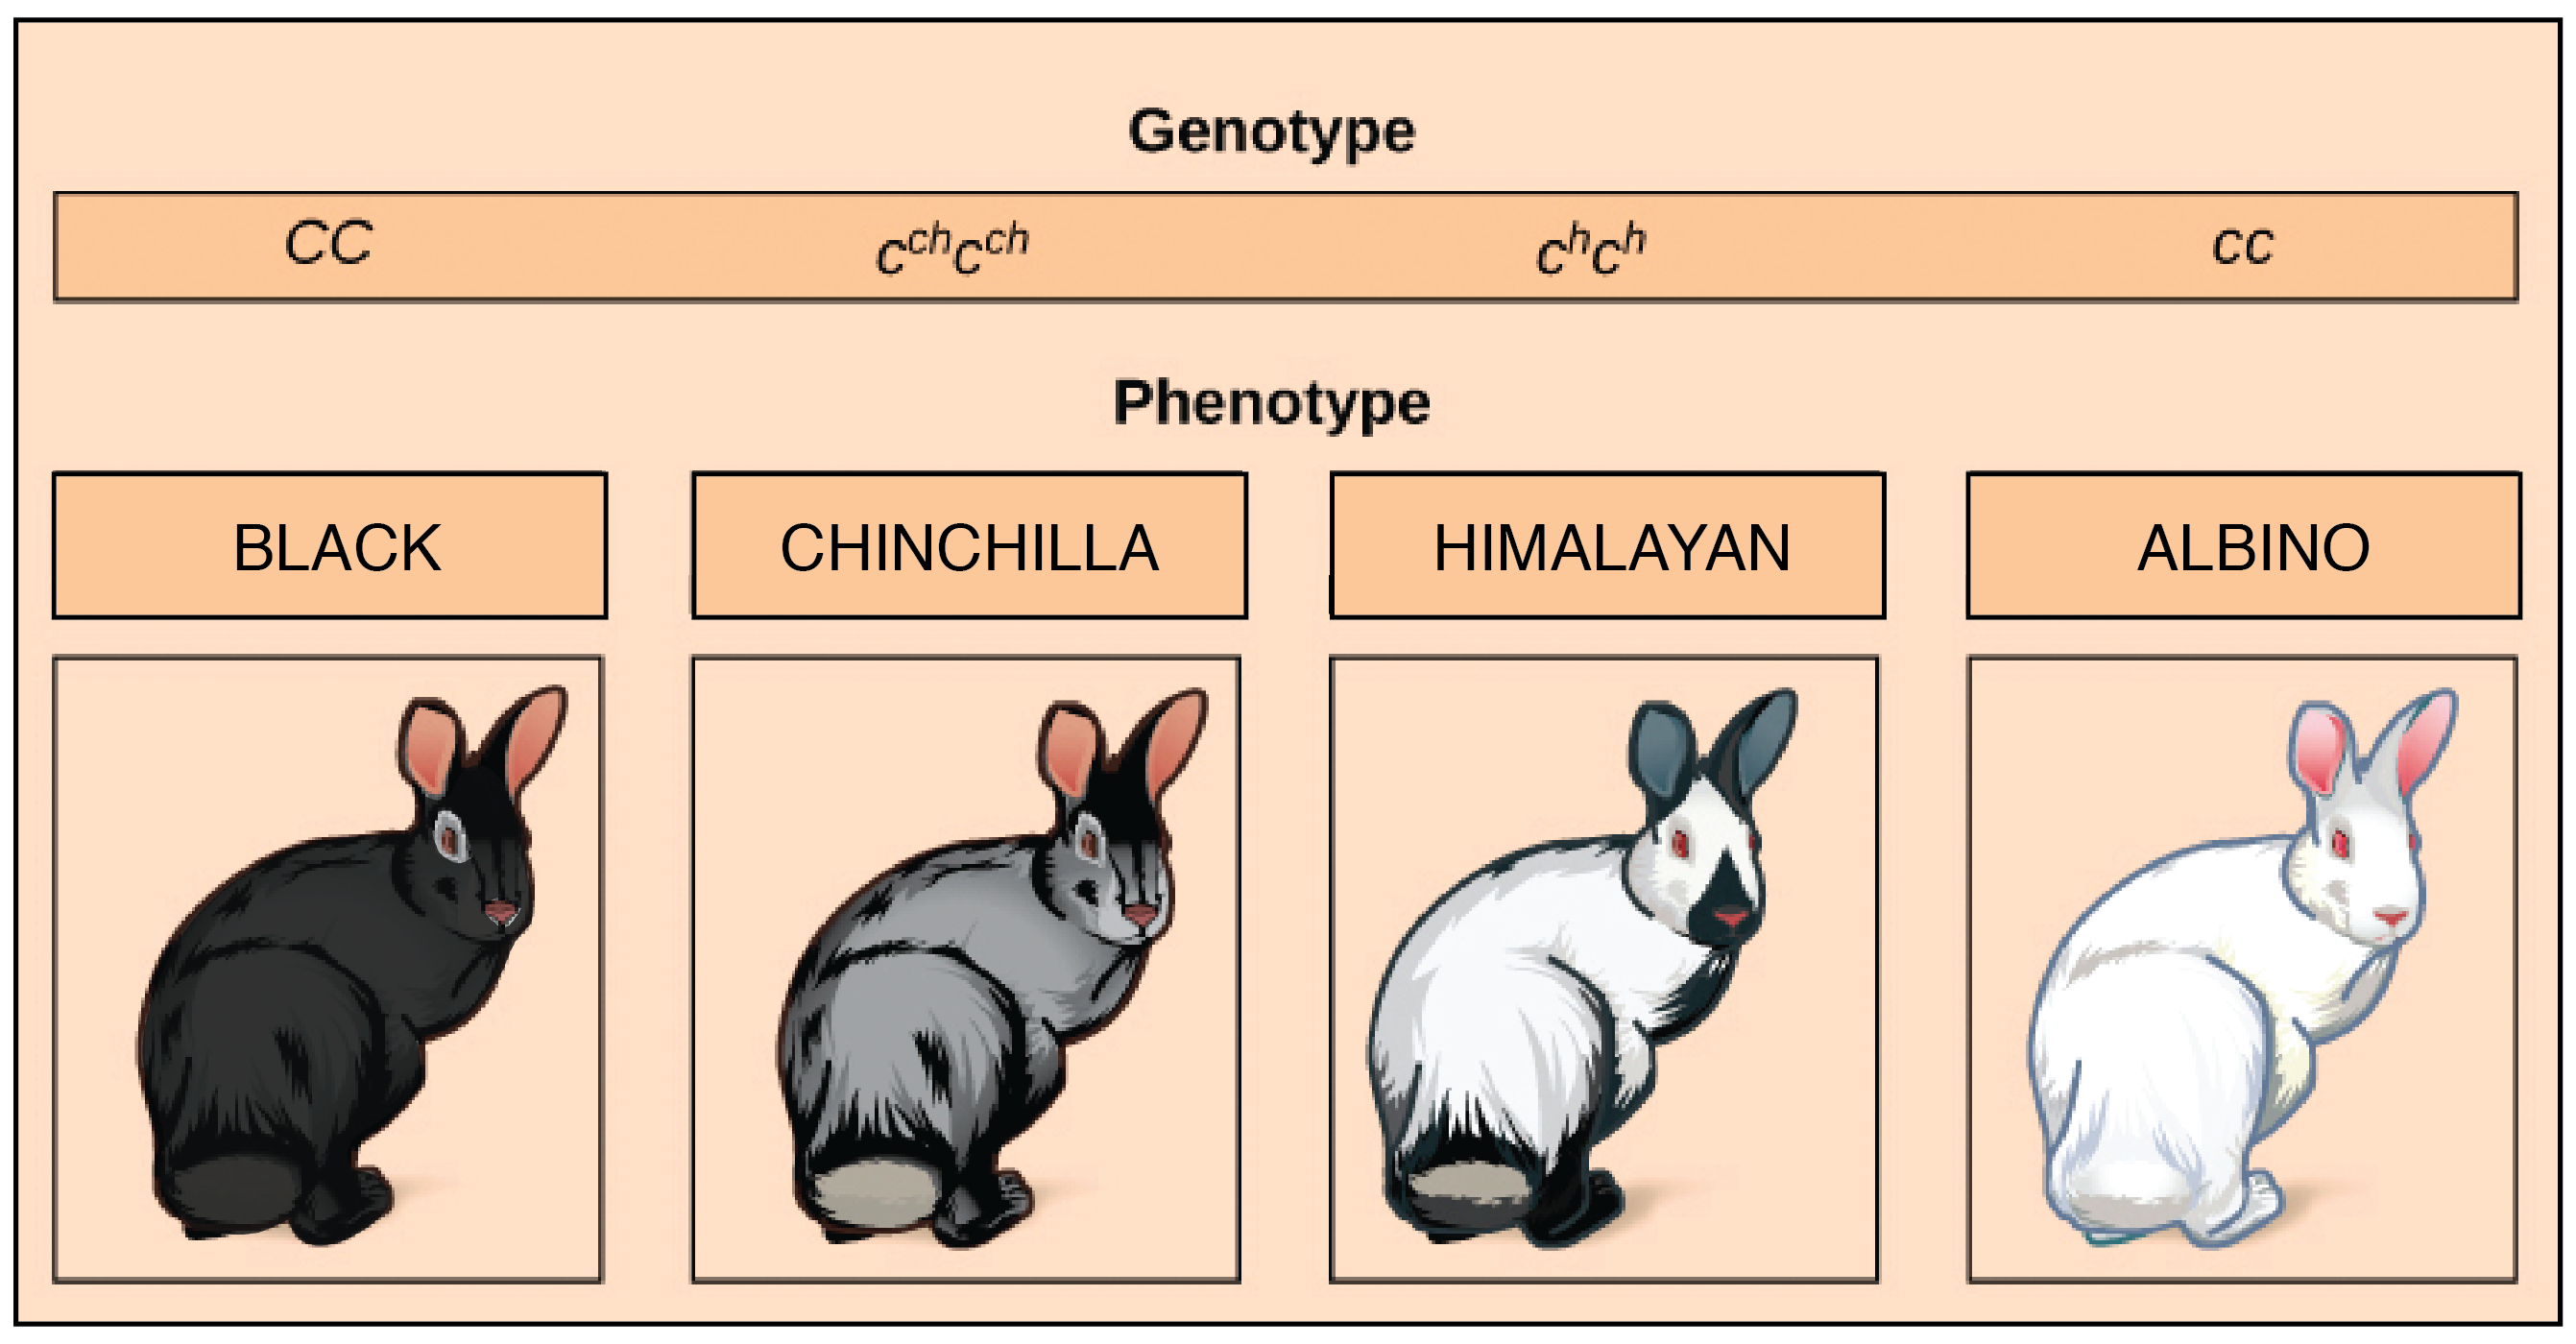 give an example of multiple alleles